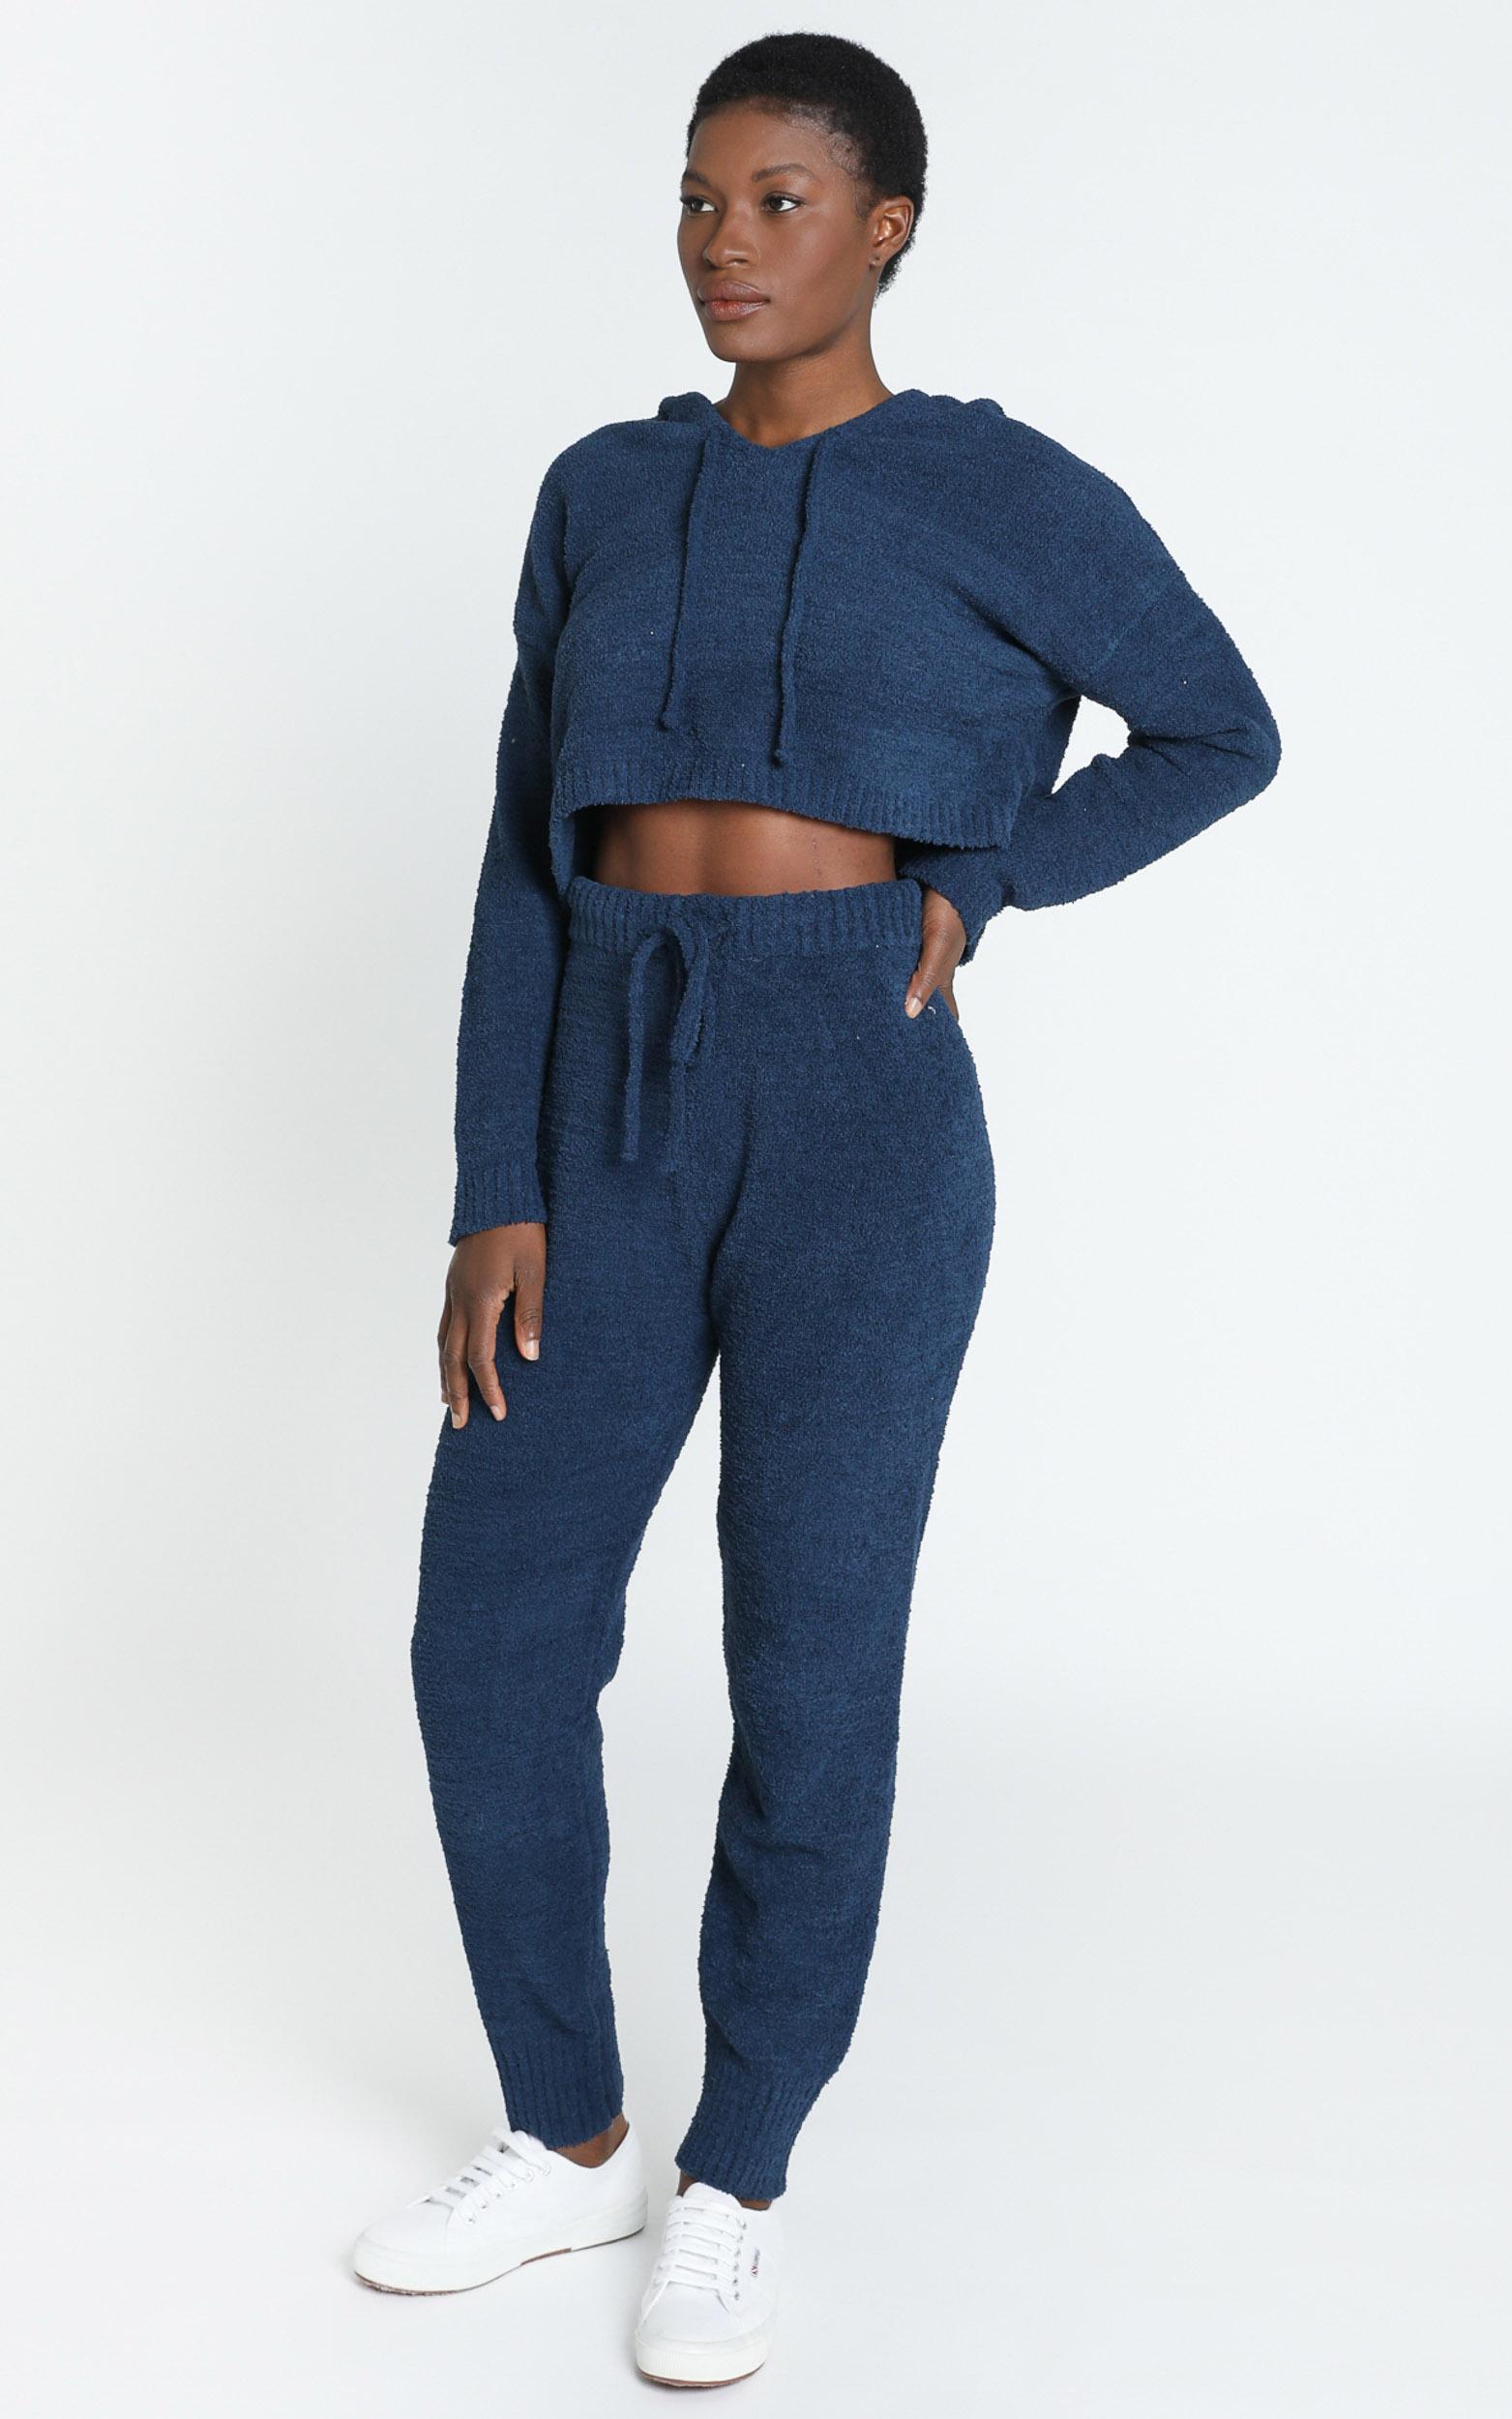 Adelie Super Soft Knit Hoody in Navy - S, NVY2, hi-res image number null